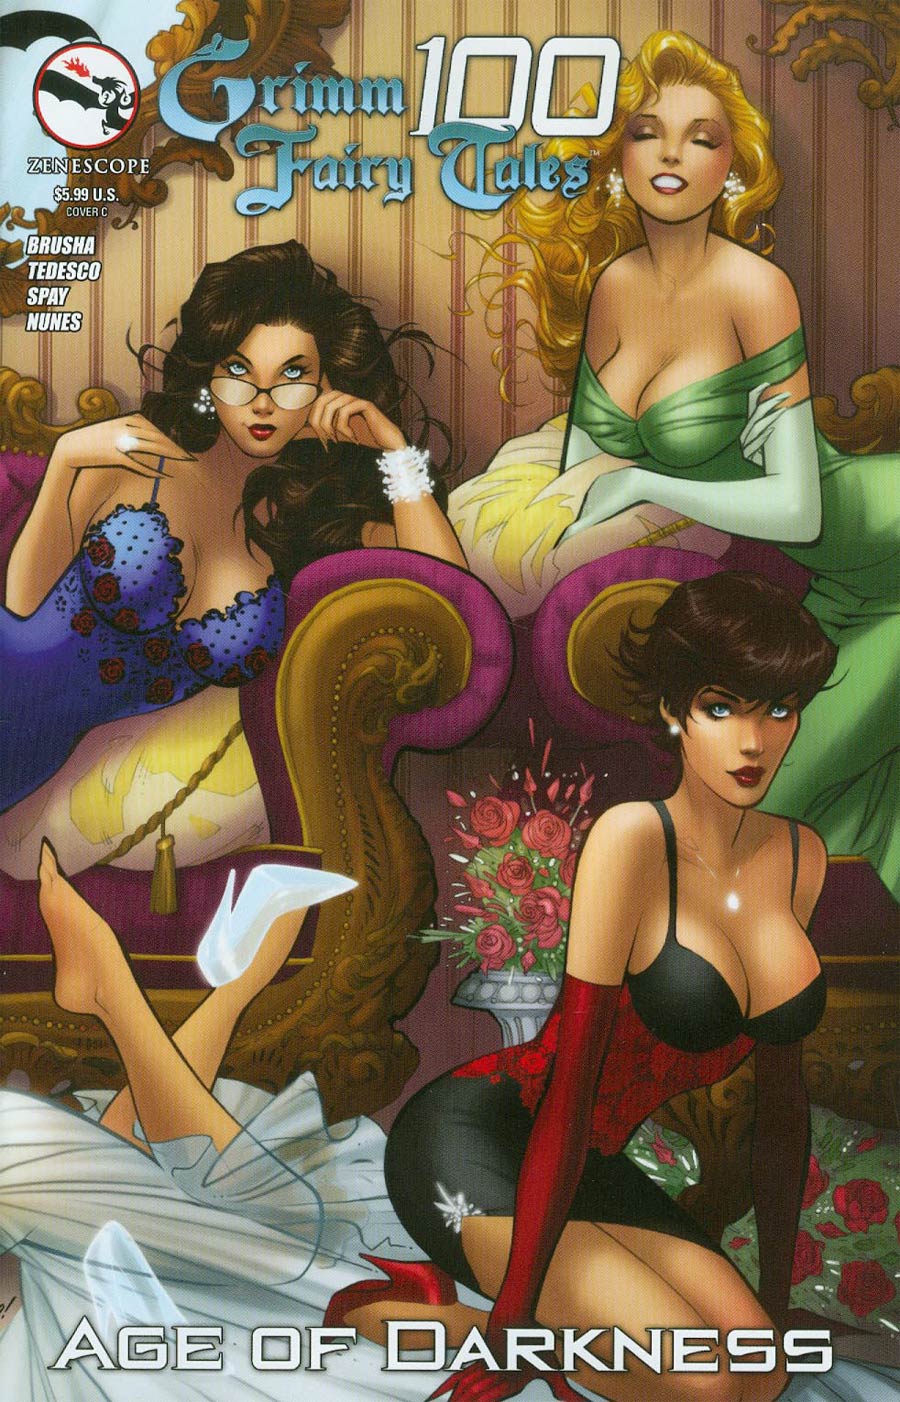 Grimm Fairy Tales #100 Cover C Franchesco Wraparound (Age Of Darkness Tie-In)